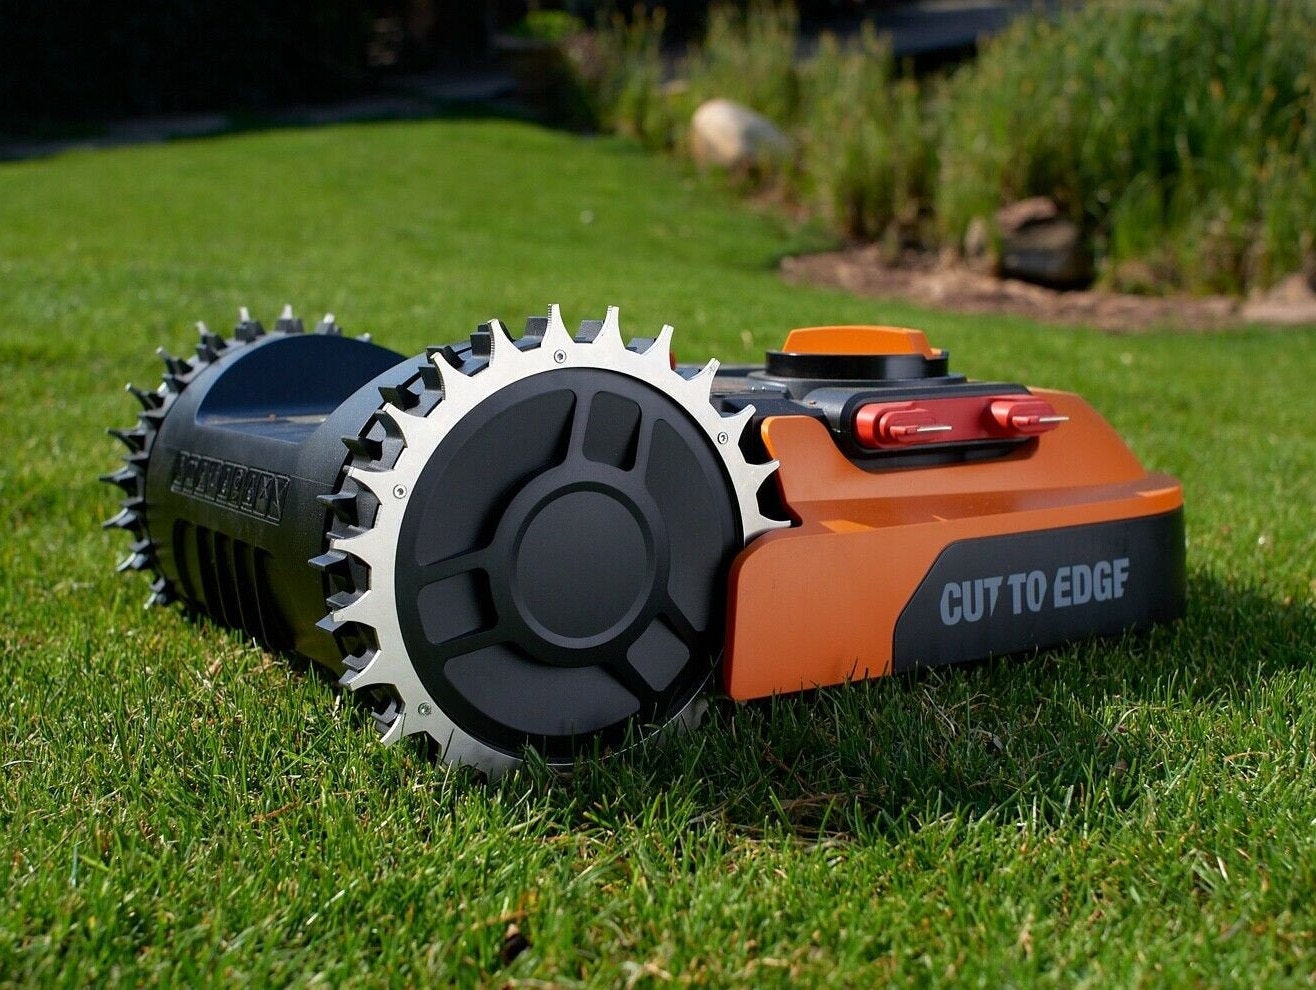 Robotic Lawn Mower Spikes Landroid S/meter Models USA: - Etsy